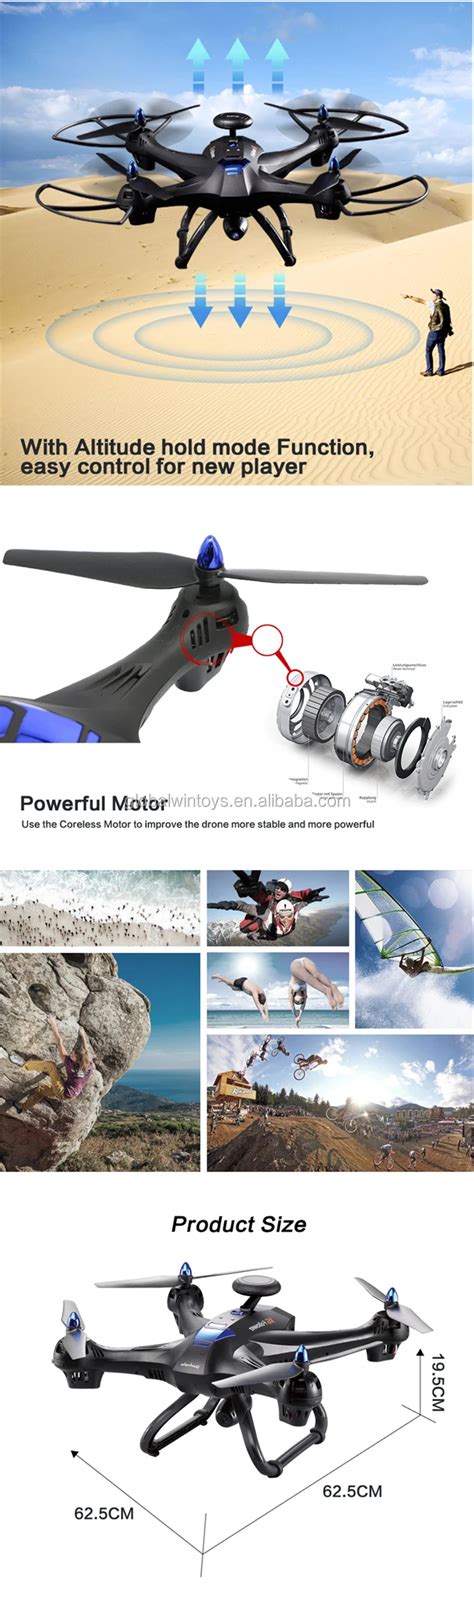 xs professional drone   fpv real time images dual gps hd camera altitude hold follow